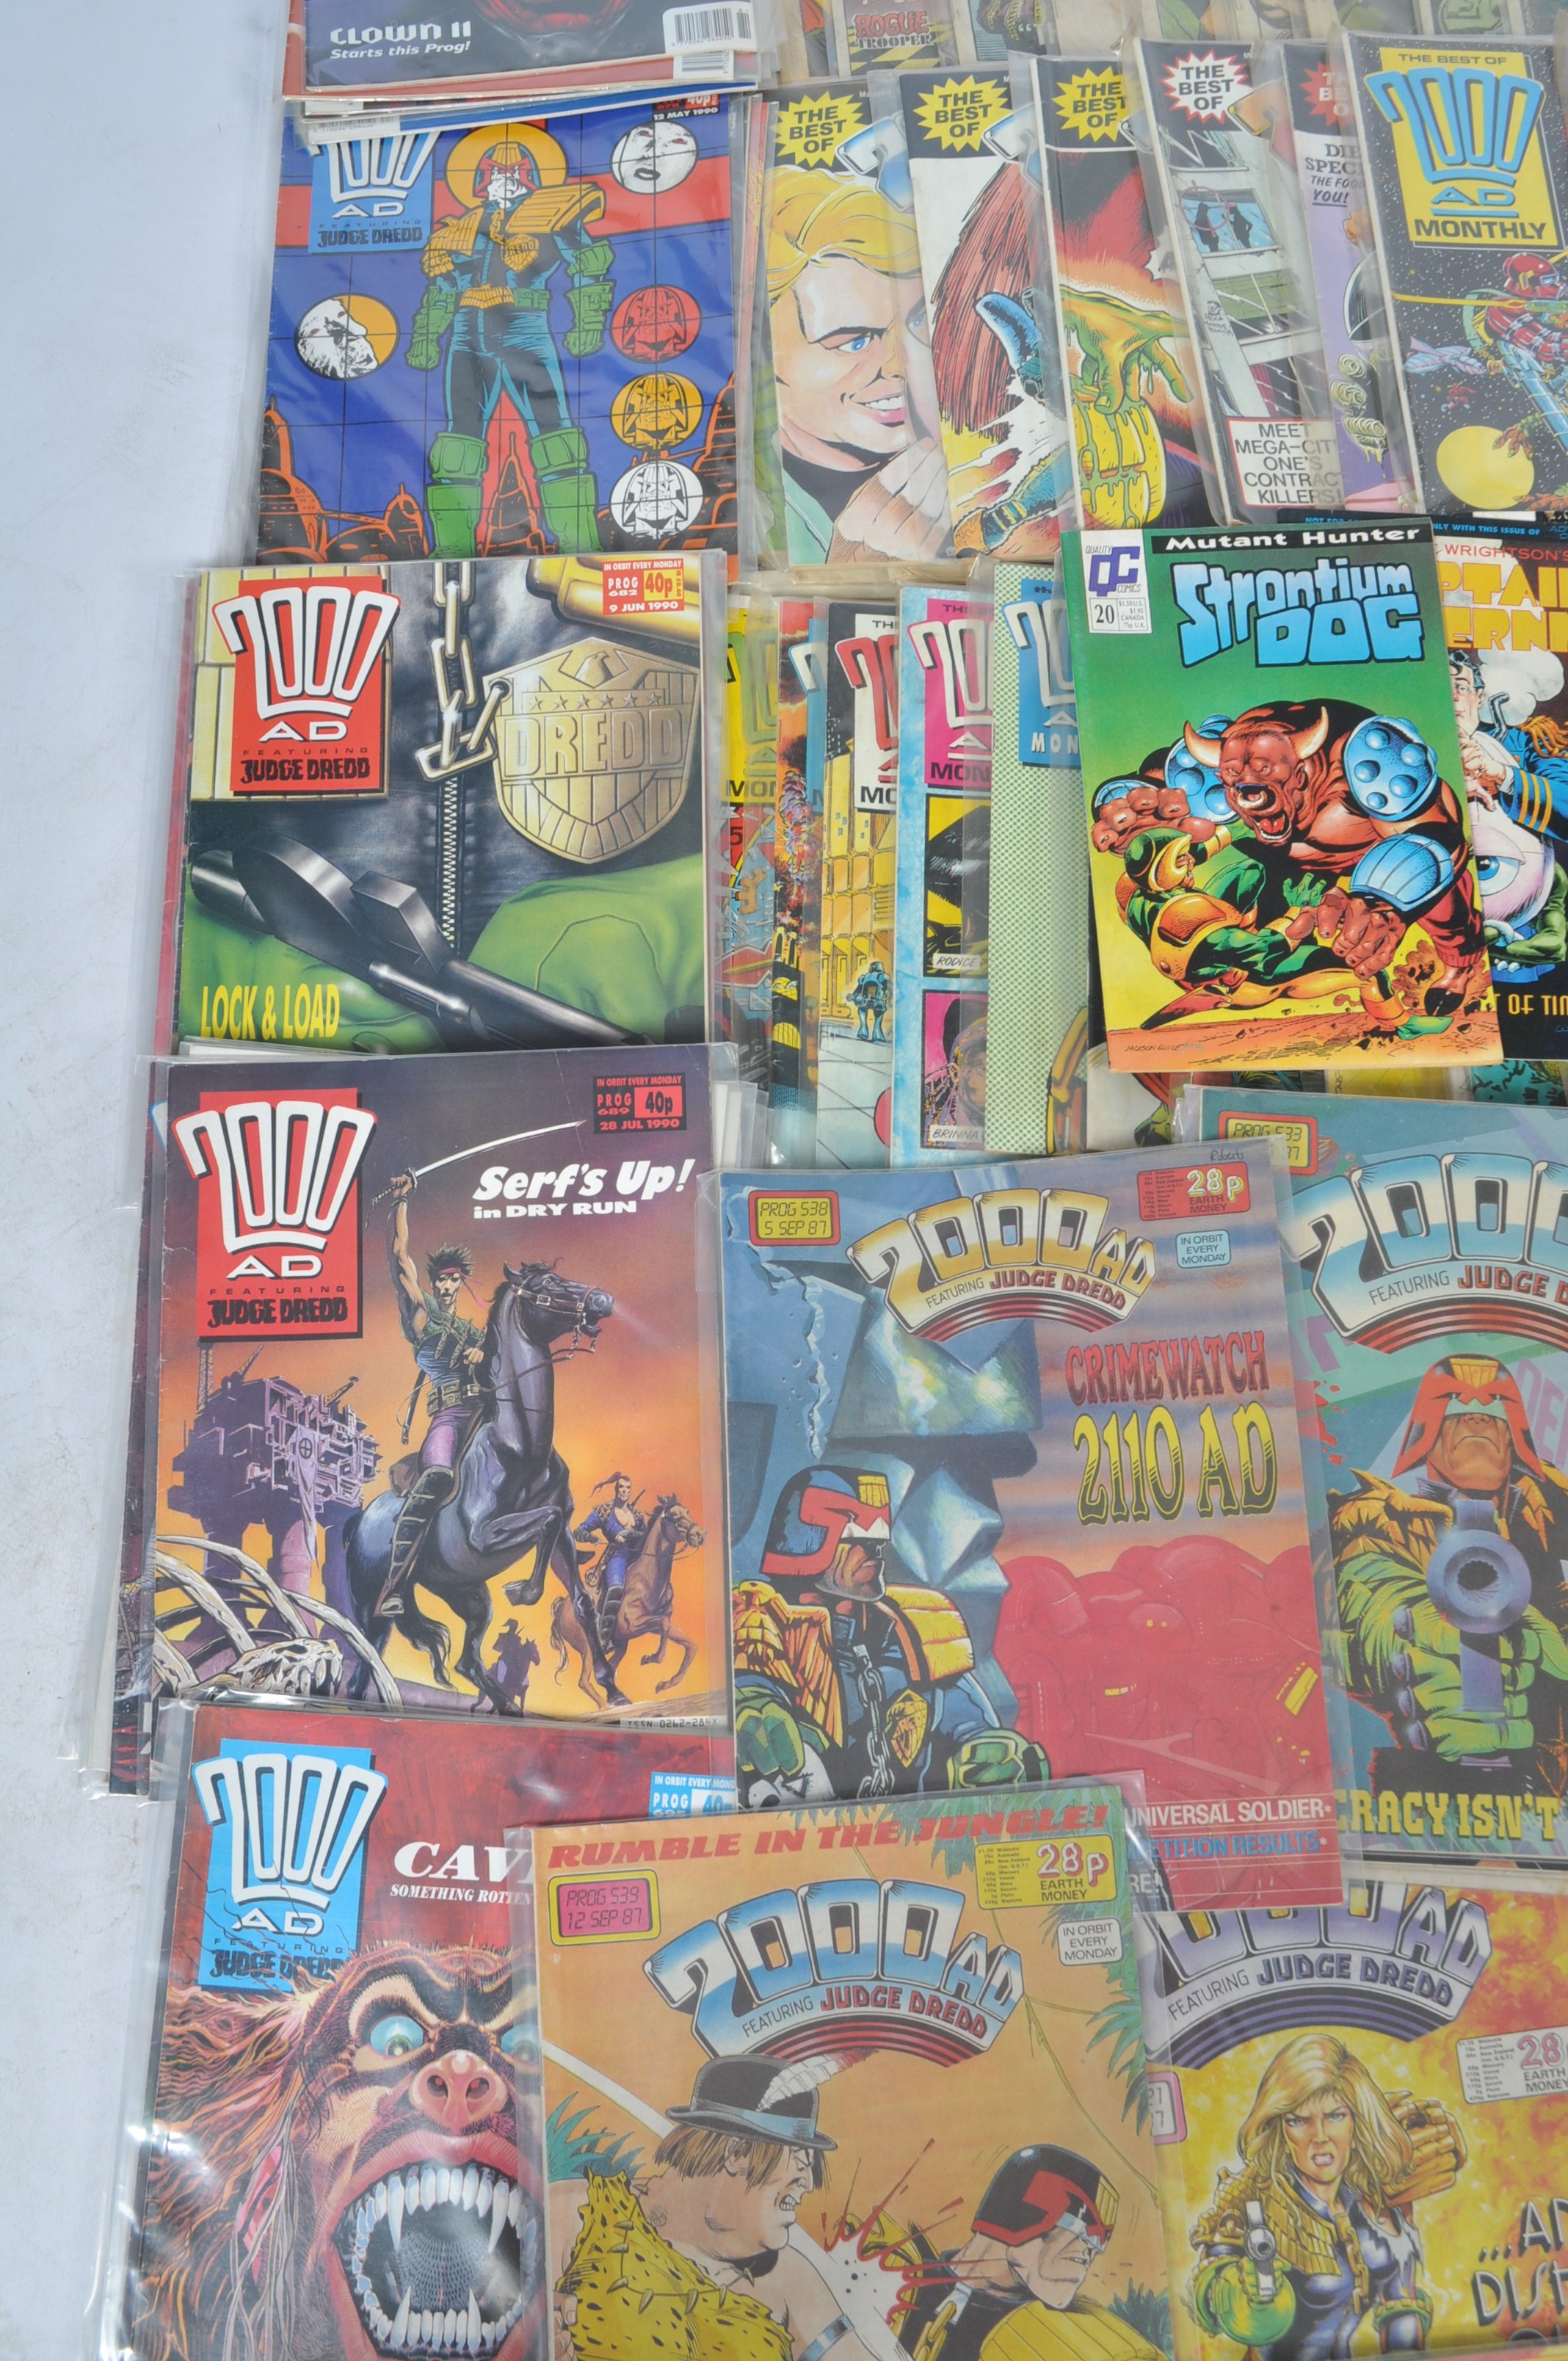 COMIC BOOKS - 2000AD - LARGE COLLECTION OF VINTAGE COMIC BOOKS - Image 8 of 17